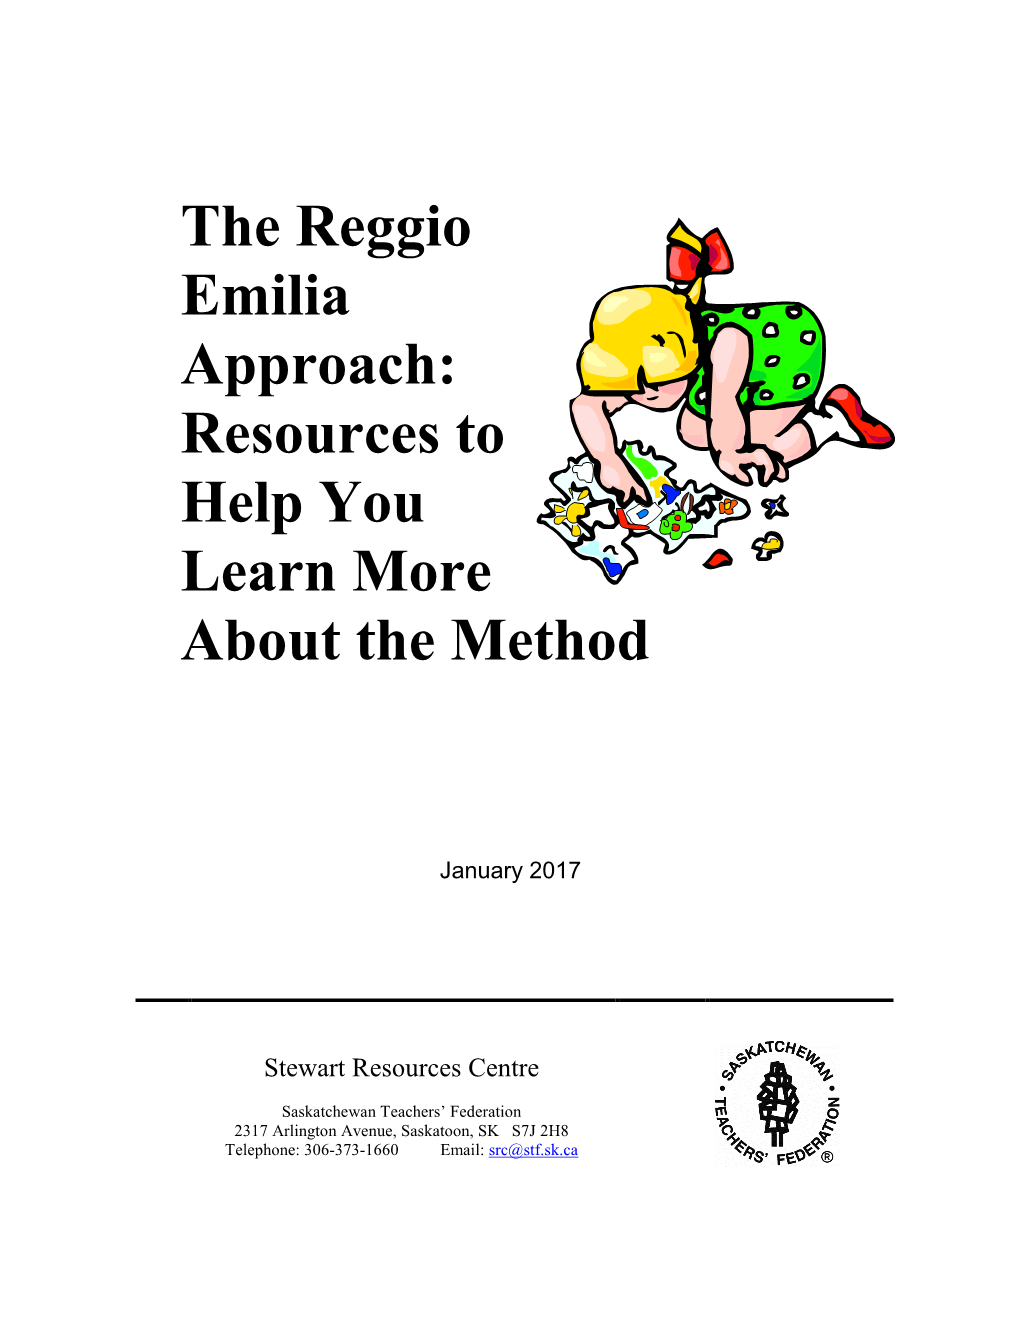 The Reggio Emilia Approach: Resources to Help You Learn More About the Method